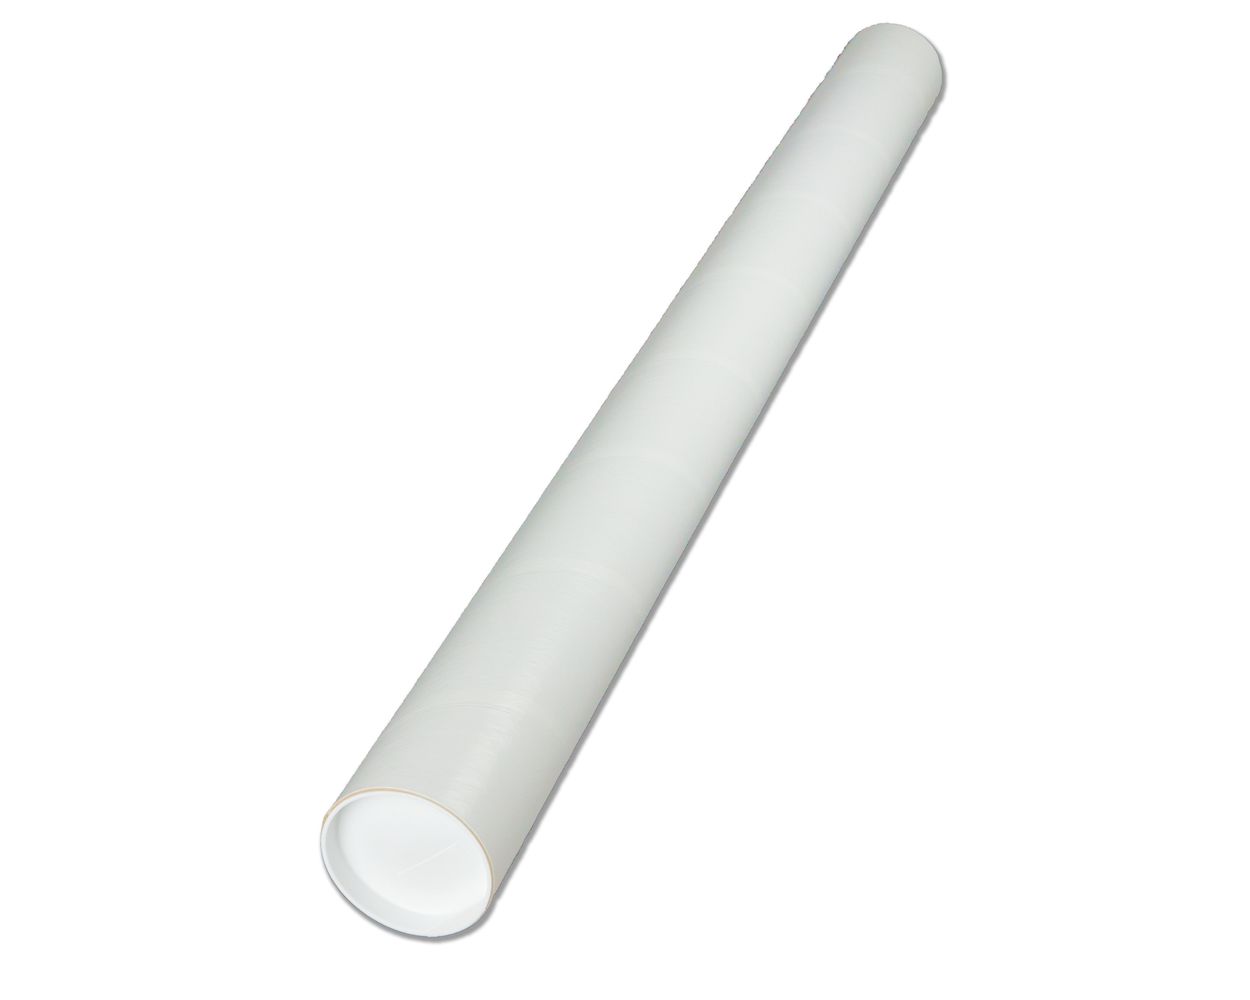 3 x 24 Mailing Tubes, Ideal for Shipping Items that Cannot be Folded,  Sturdy Fiberboard Covered with White Kraft Paper, Includes End caps, 25 per  Carton